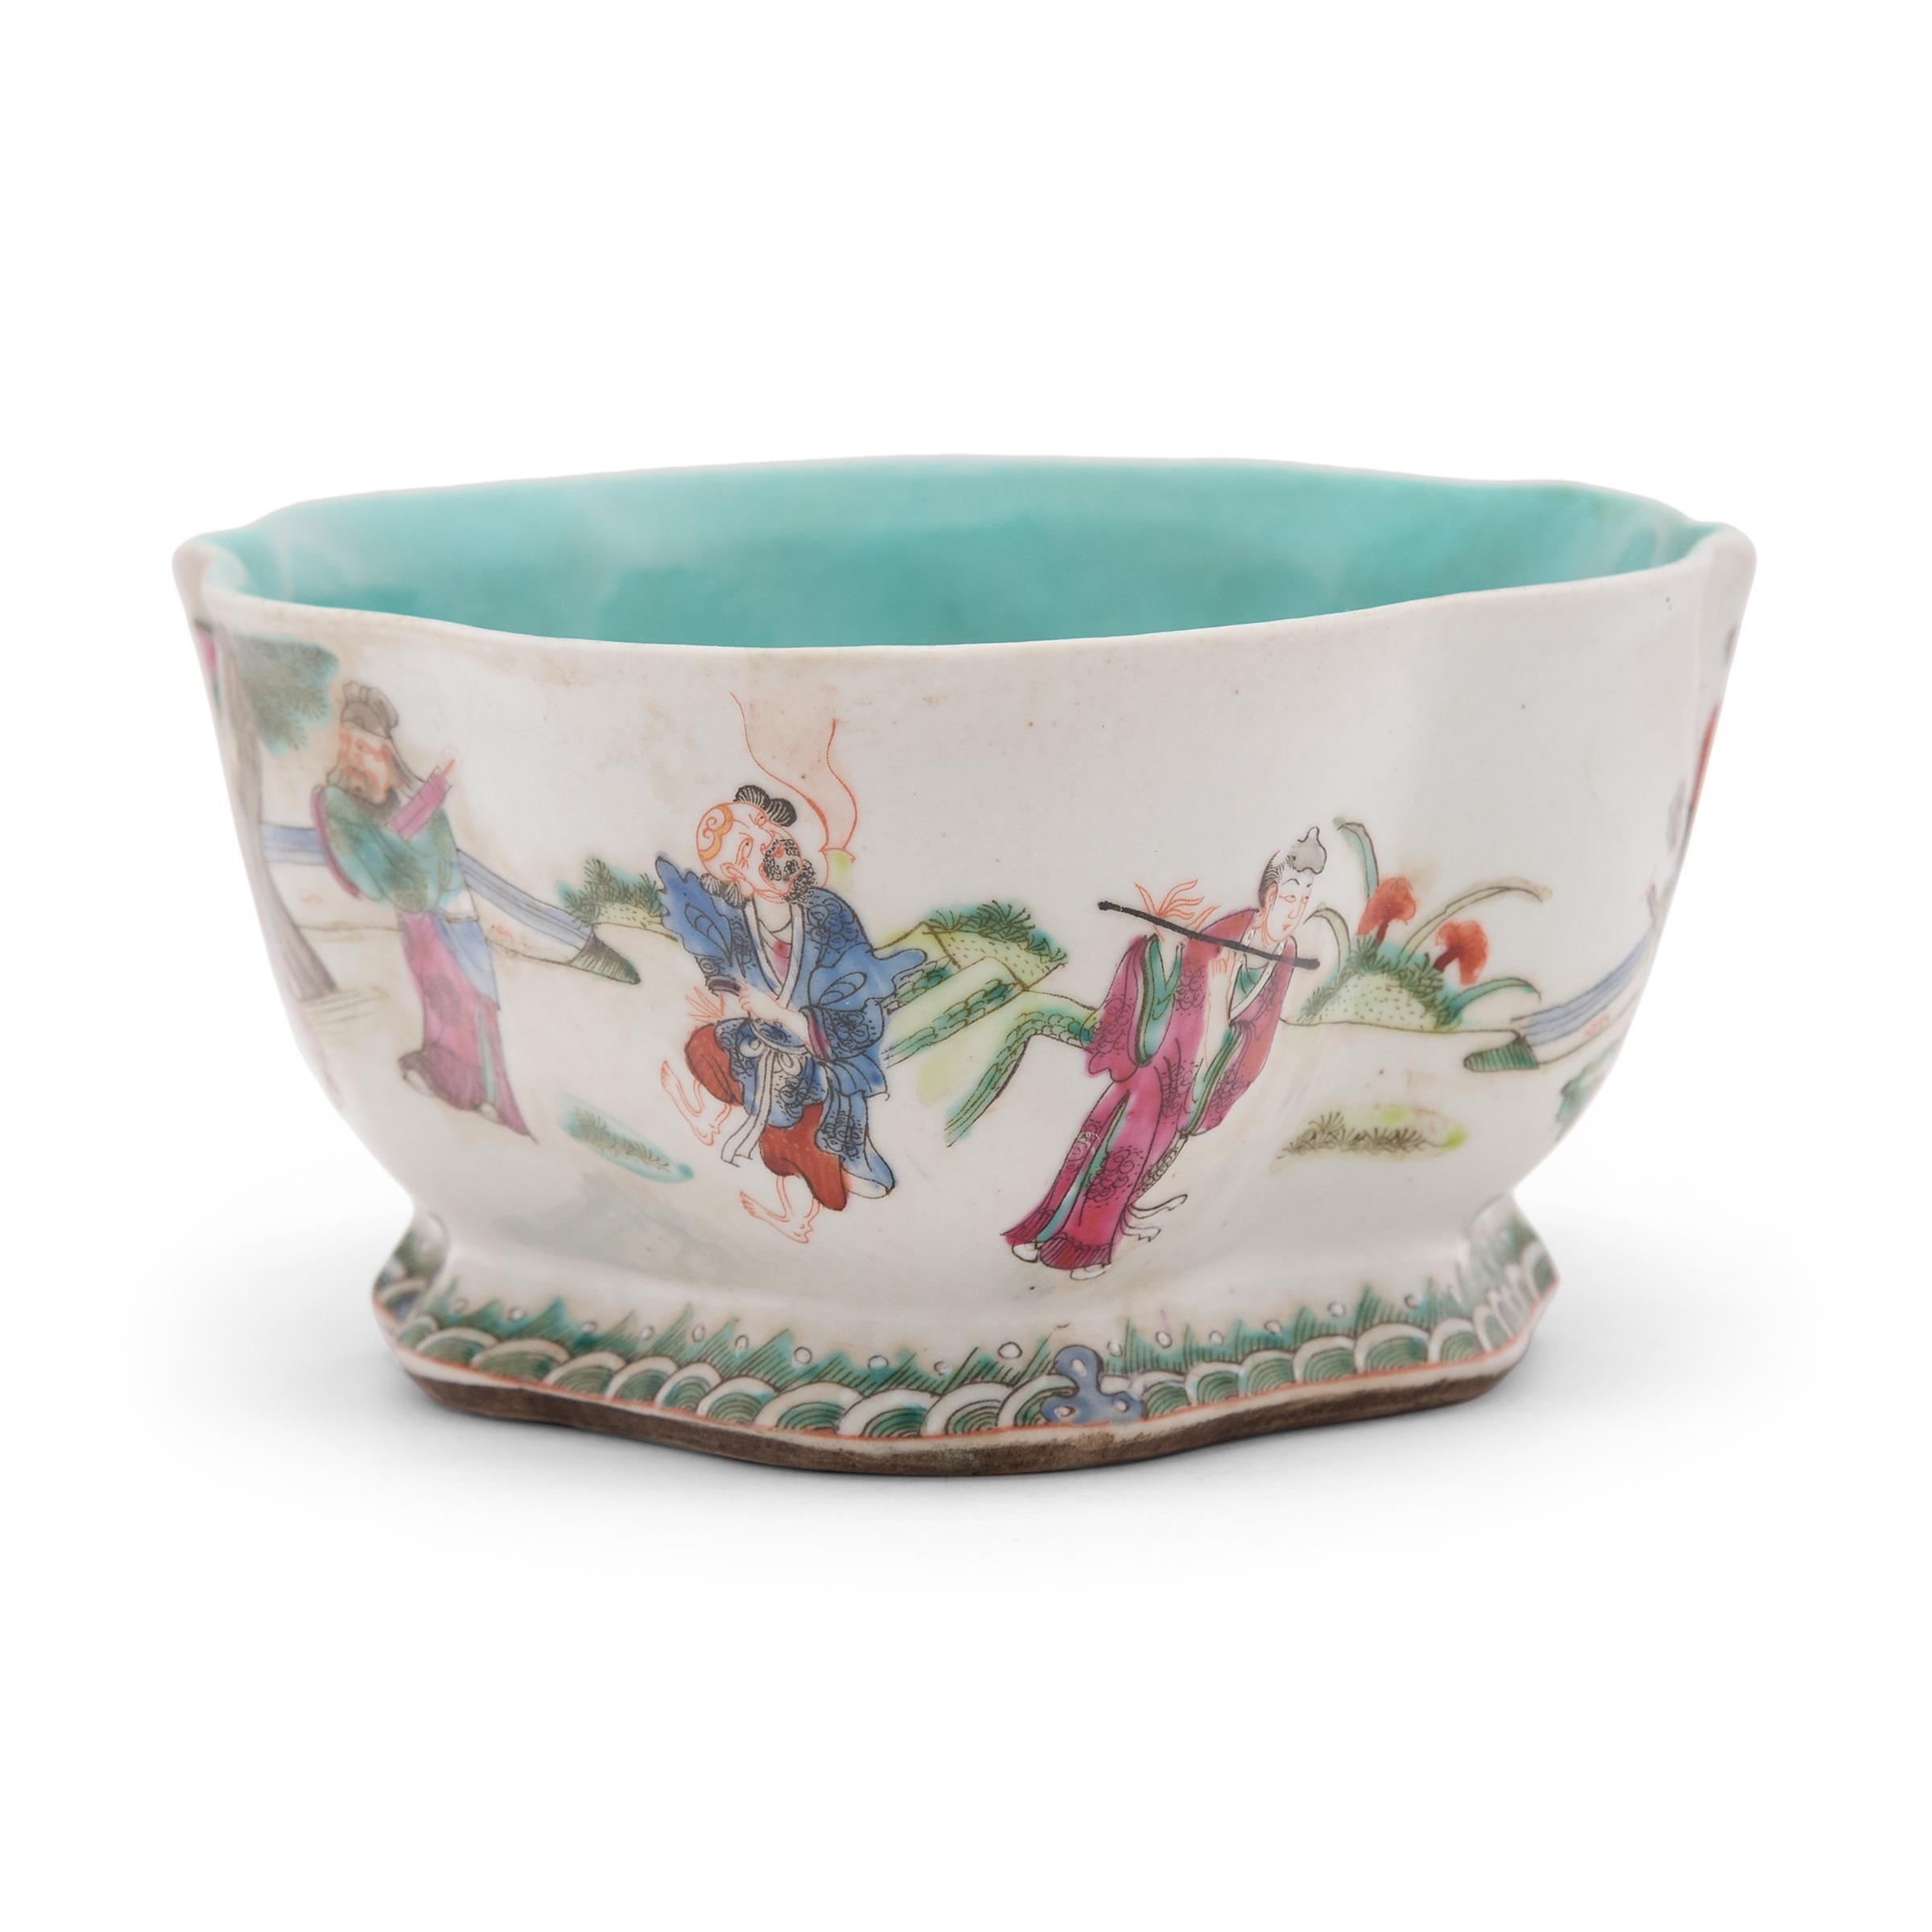 Enameled Chinese Footed Offering Bowl with Gathering of Immortals, c. 1900